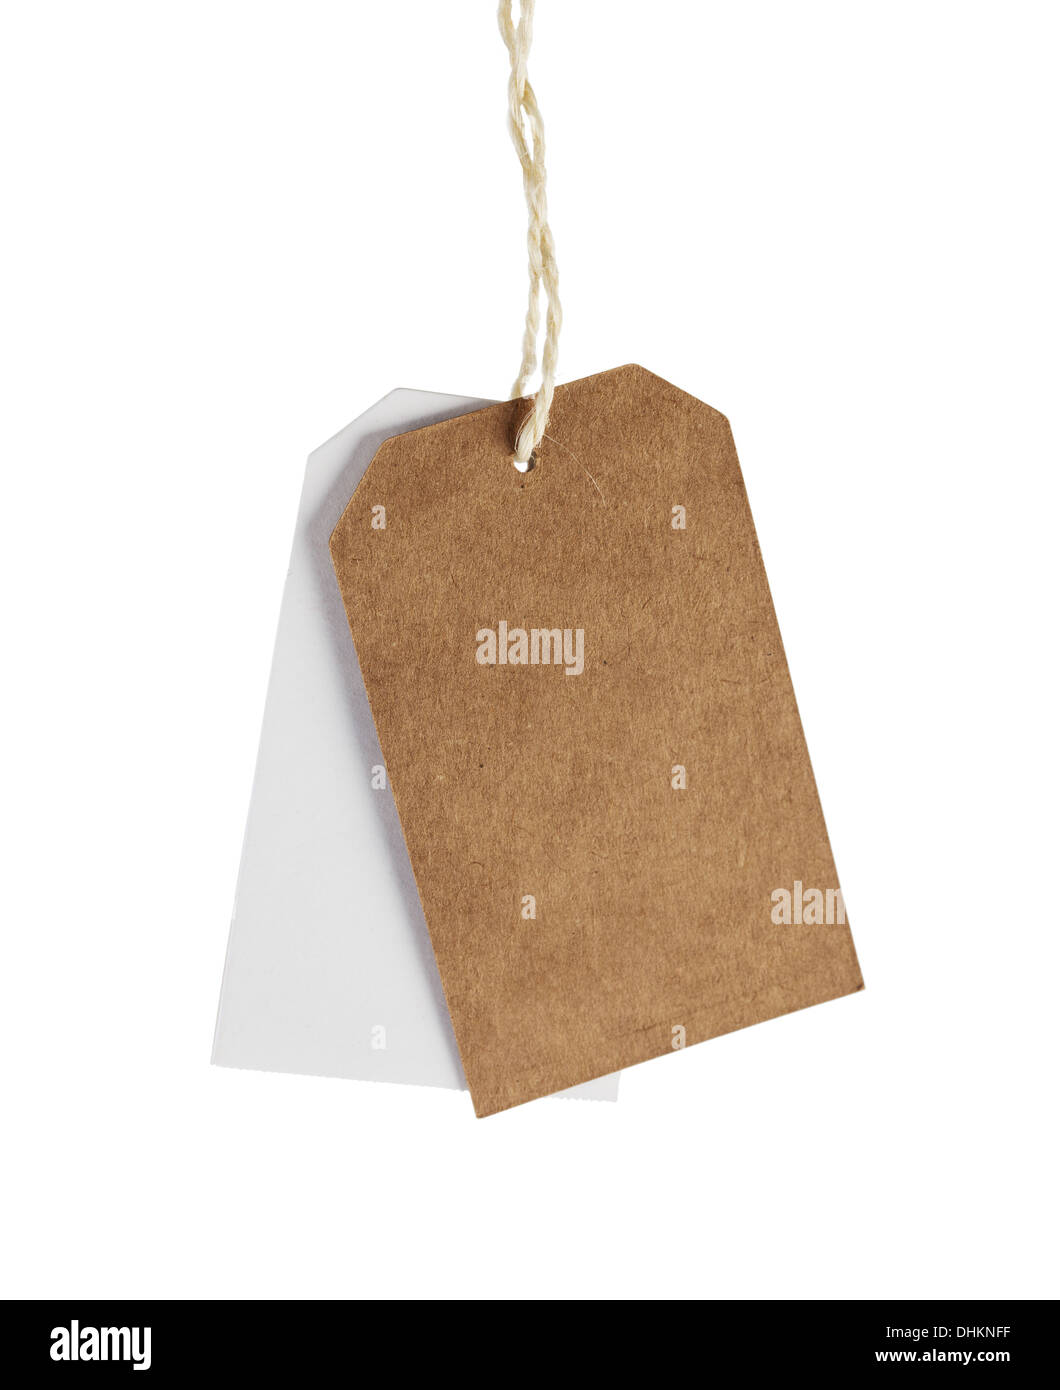 Blank tag label on white background Stock Photo